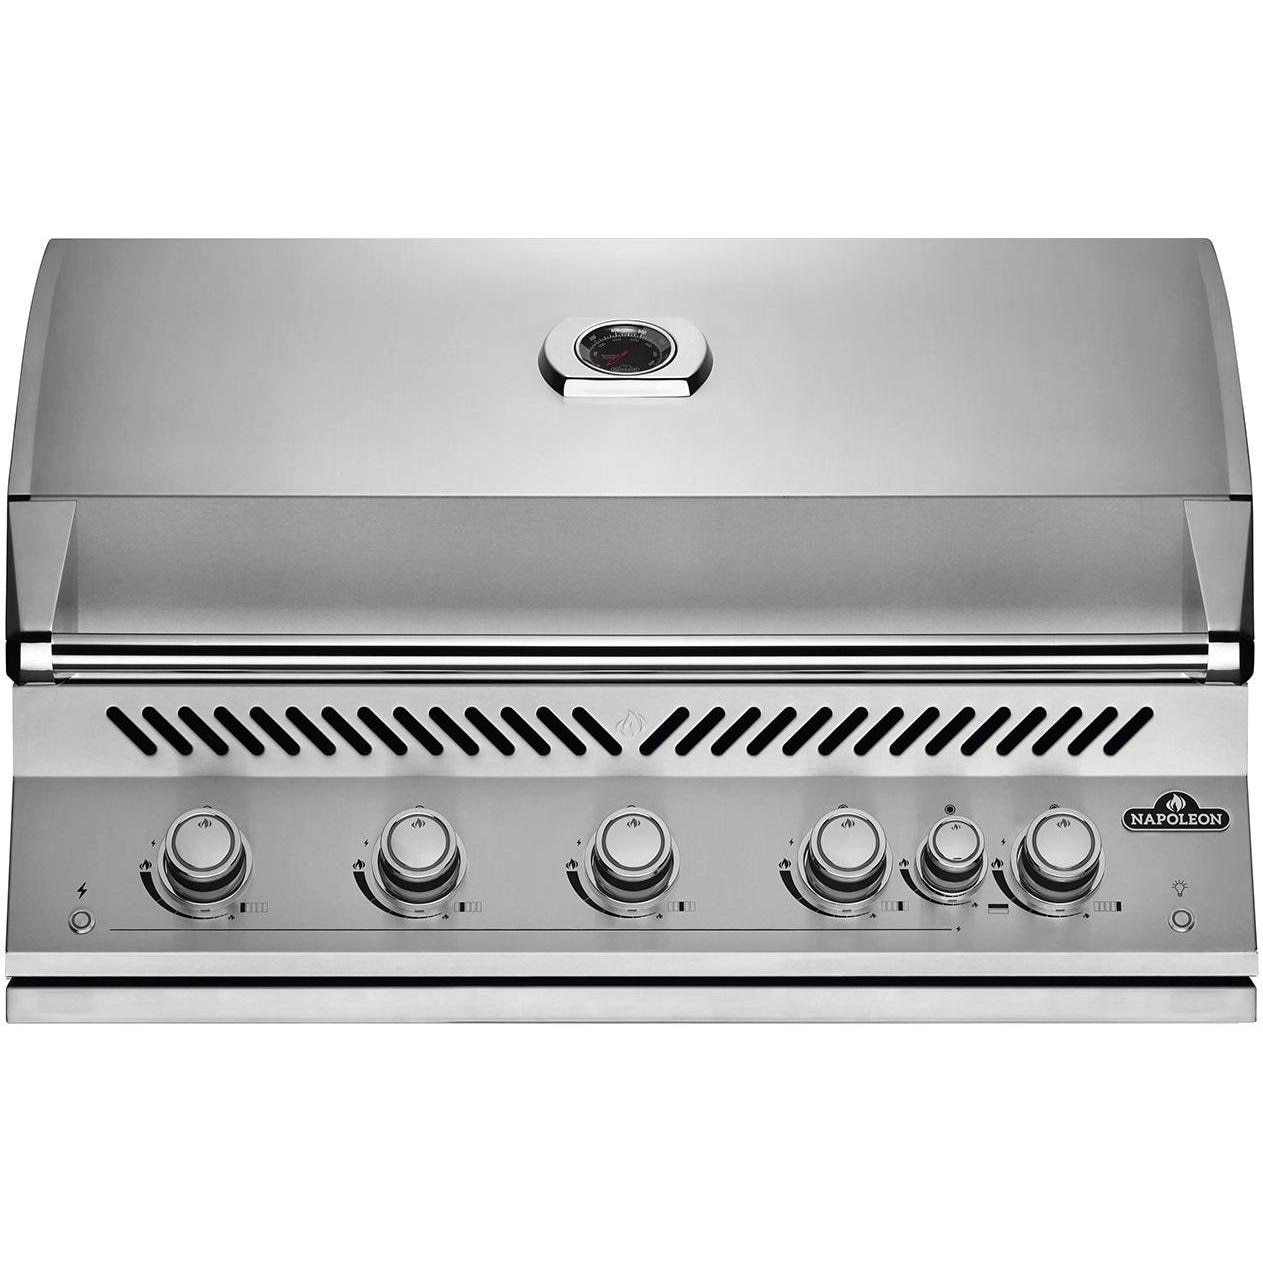 Napoleon Built-In 700 Series 38-Inch Propane Gas Grill w/ Infrared Rear Burner & Rotisserie Kit - BIG38RBPSS - image 2 of 6